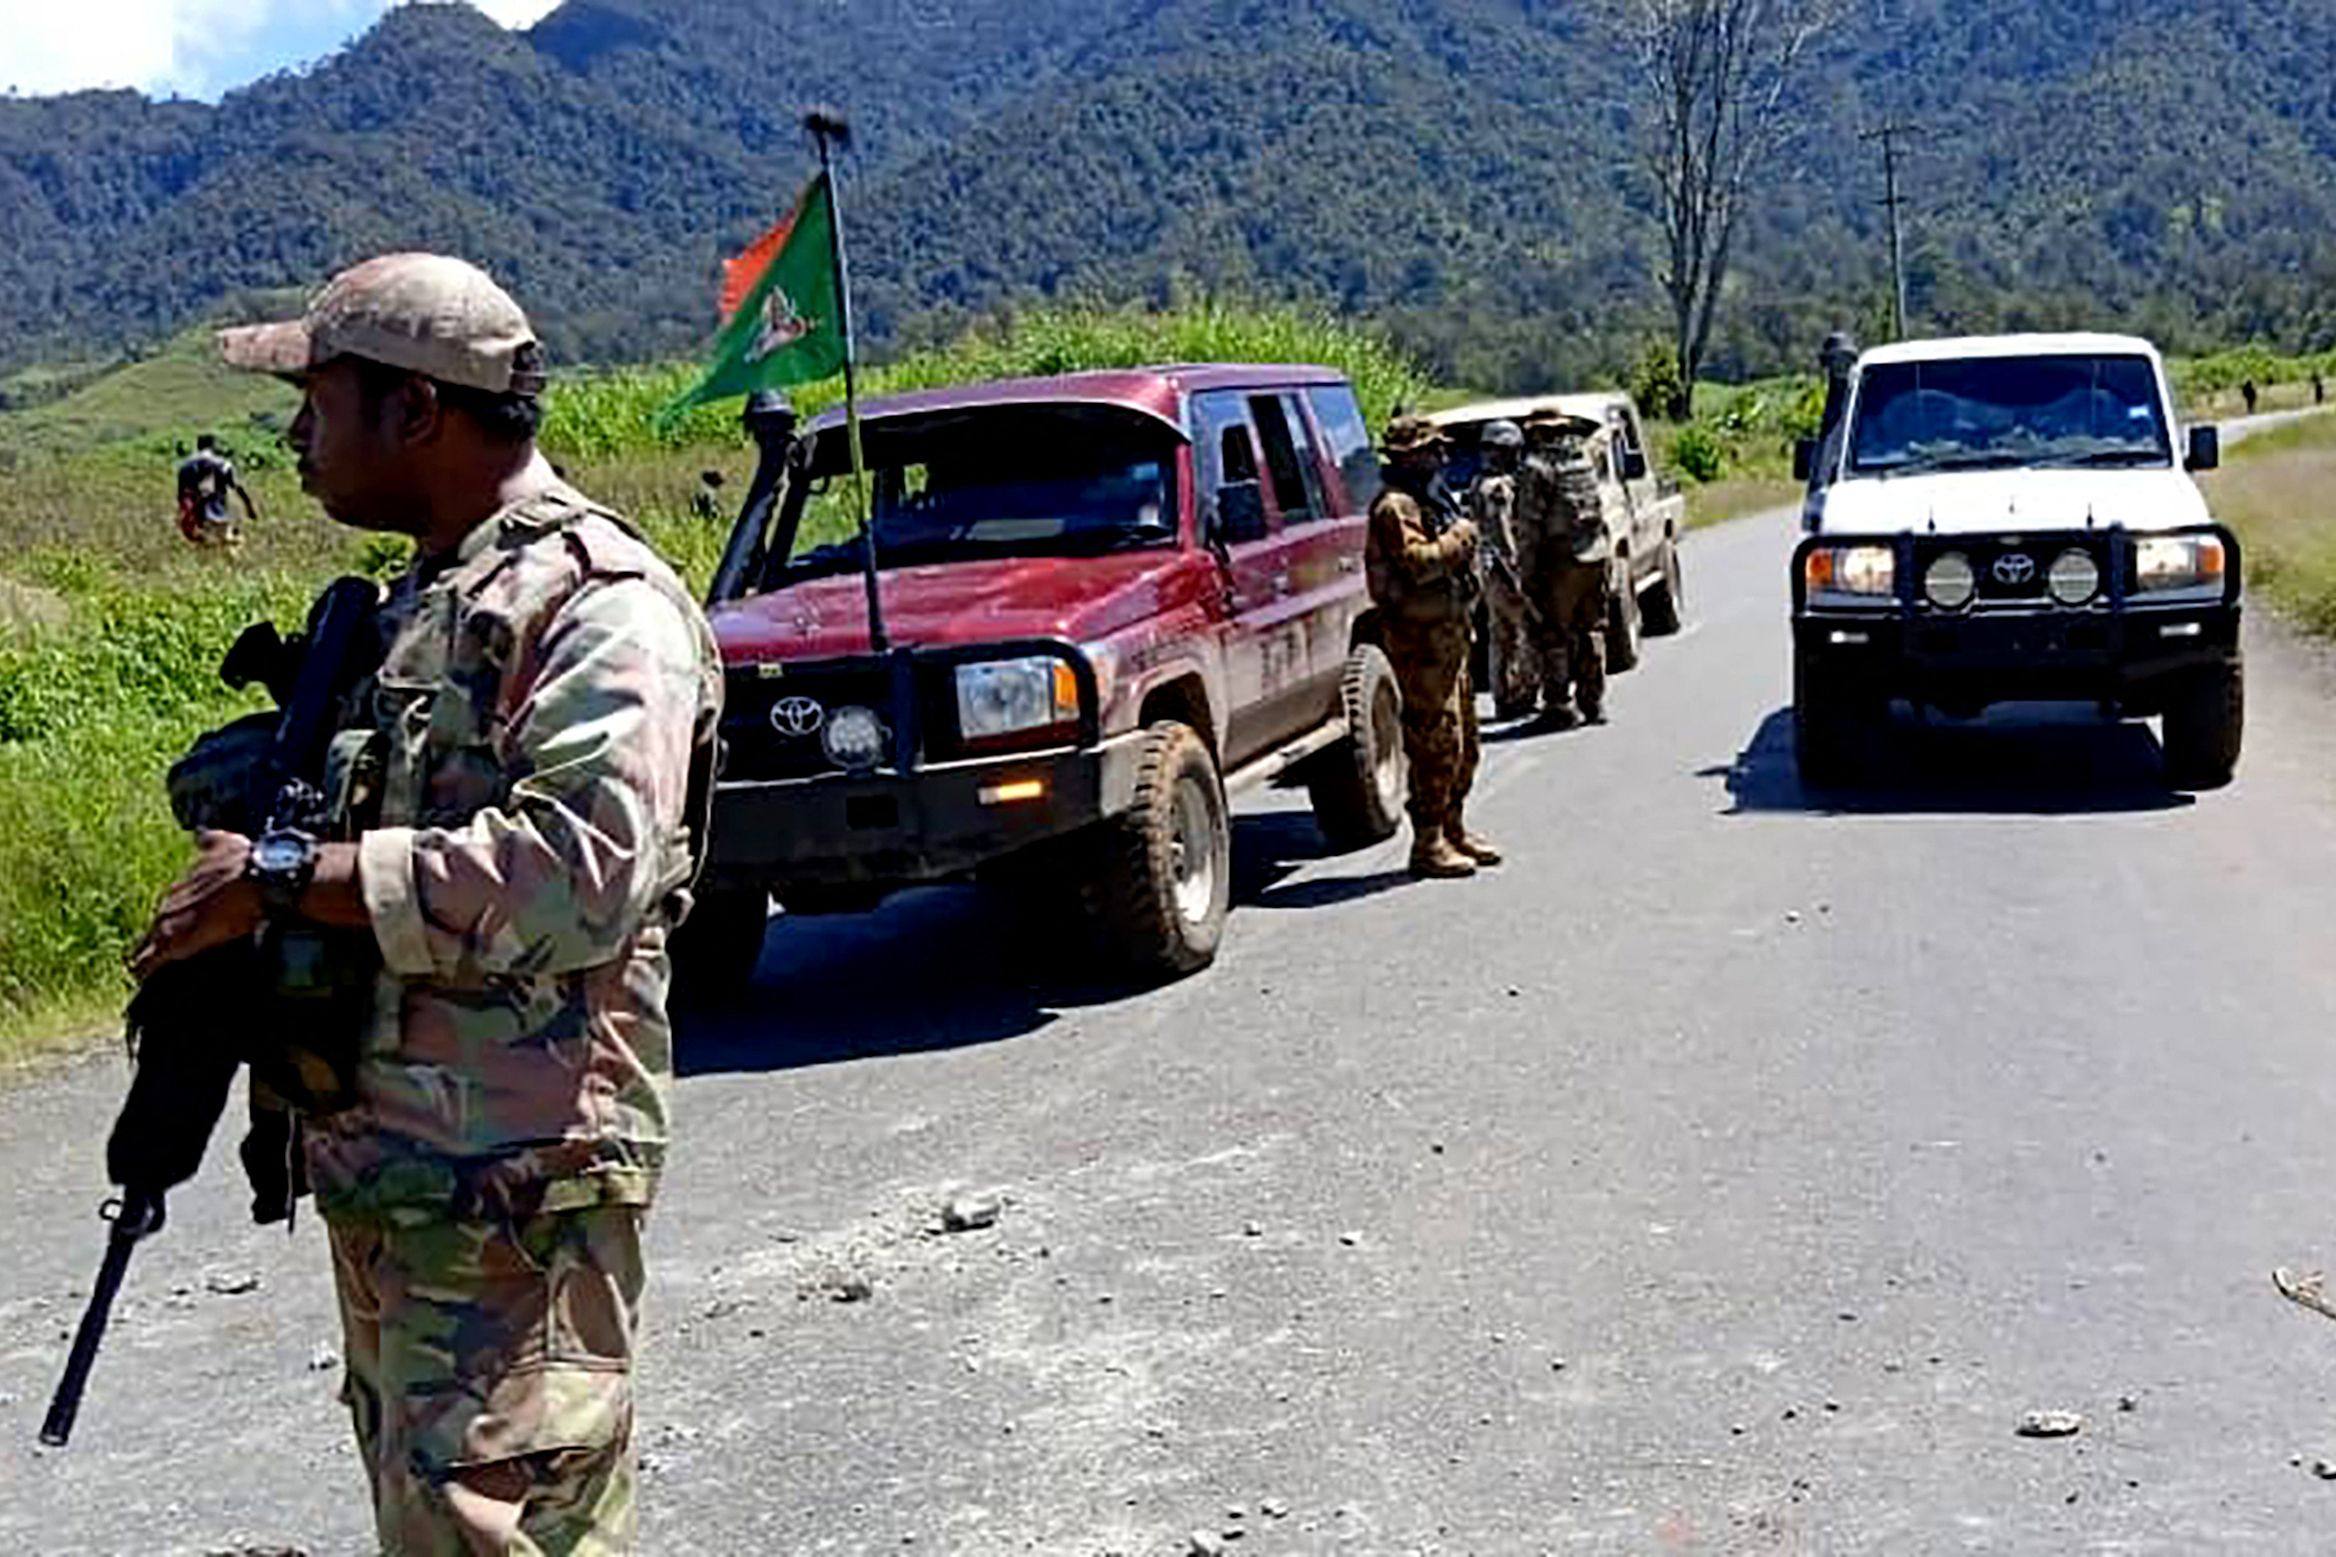 Officers patrol near the town of Wabag in Papua New Guinea’s highlands, where dozens of bodies were found after gun battles between rival tribes. Photo: Royal Papua New Guinea Constabulary / Handout via AFP